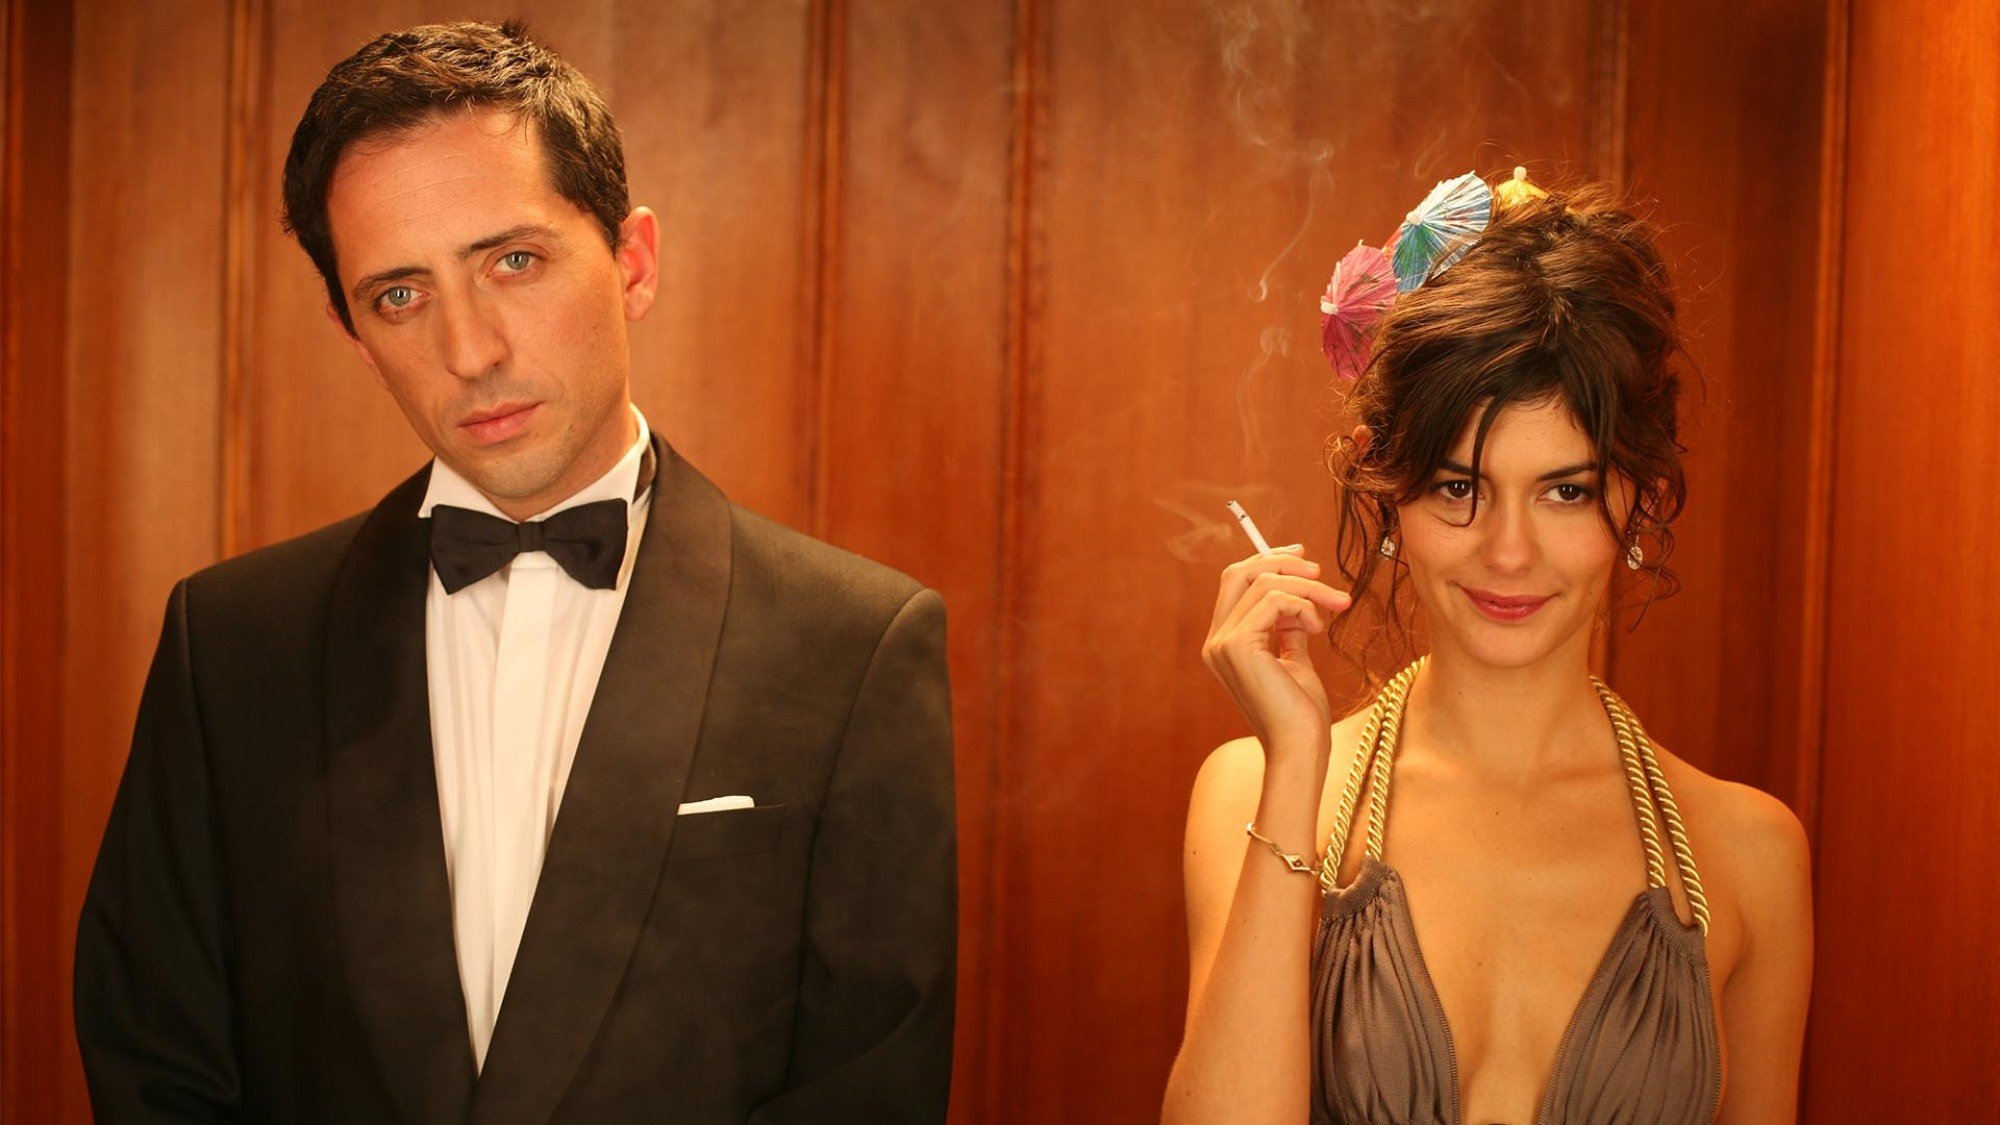 A sharply dressed man and woman in a hotel elevator: Gad Elmaleh and Audrey Tautou in "Priceless."